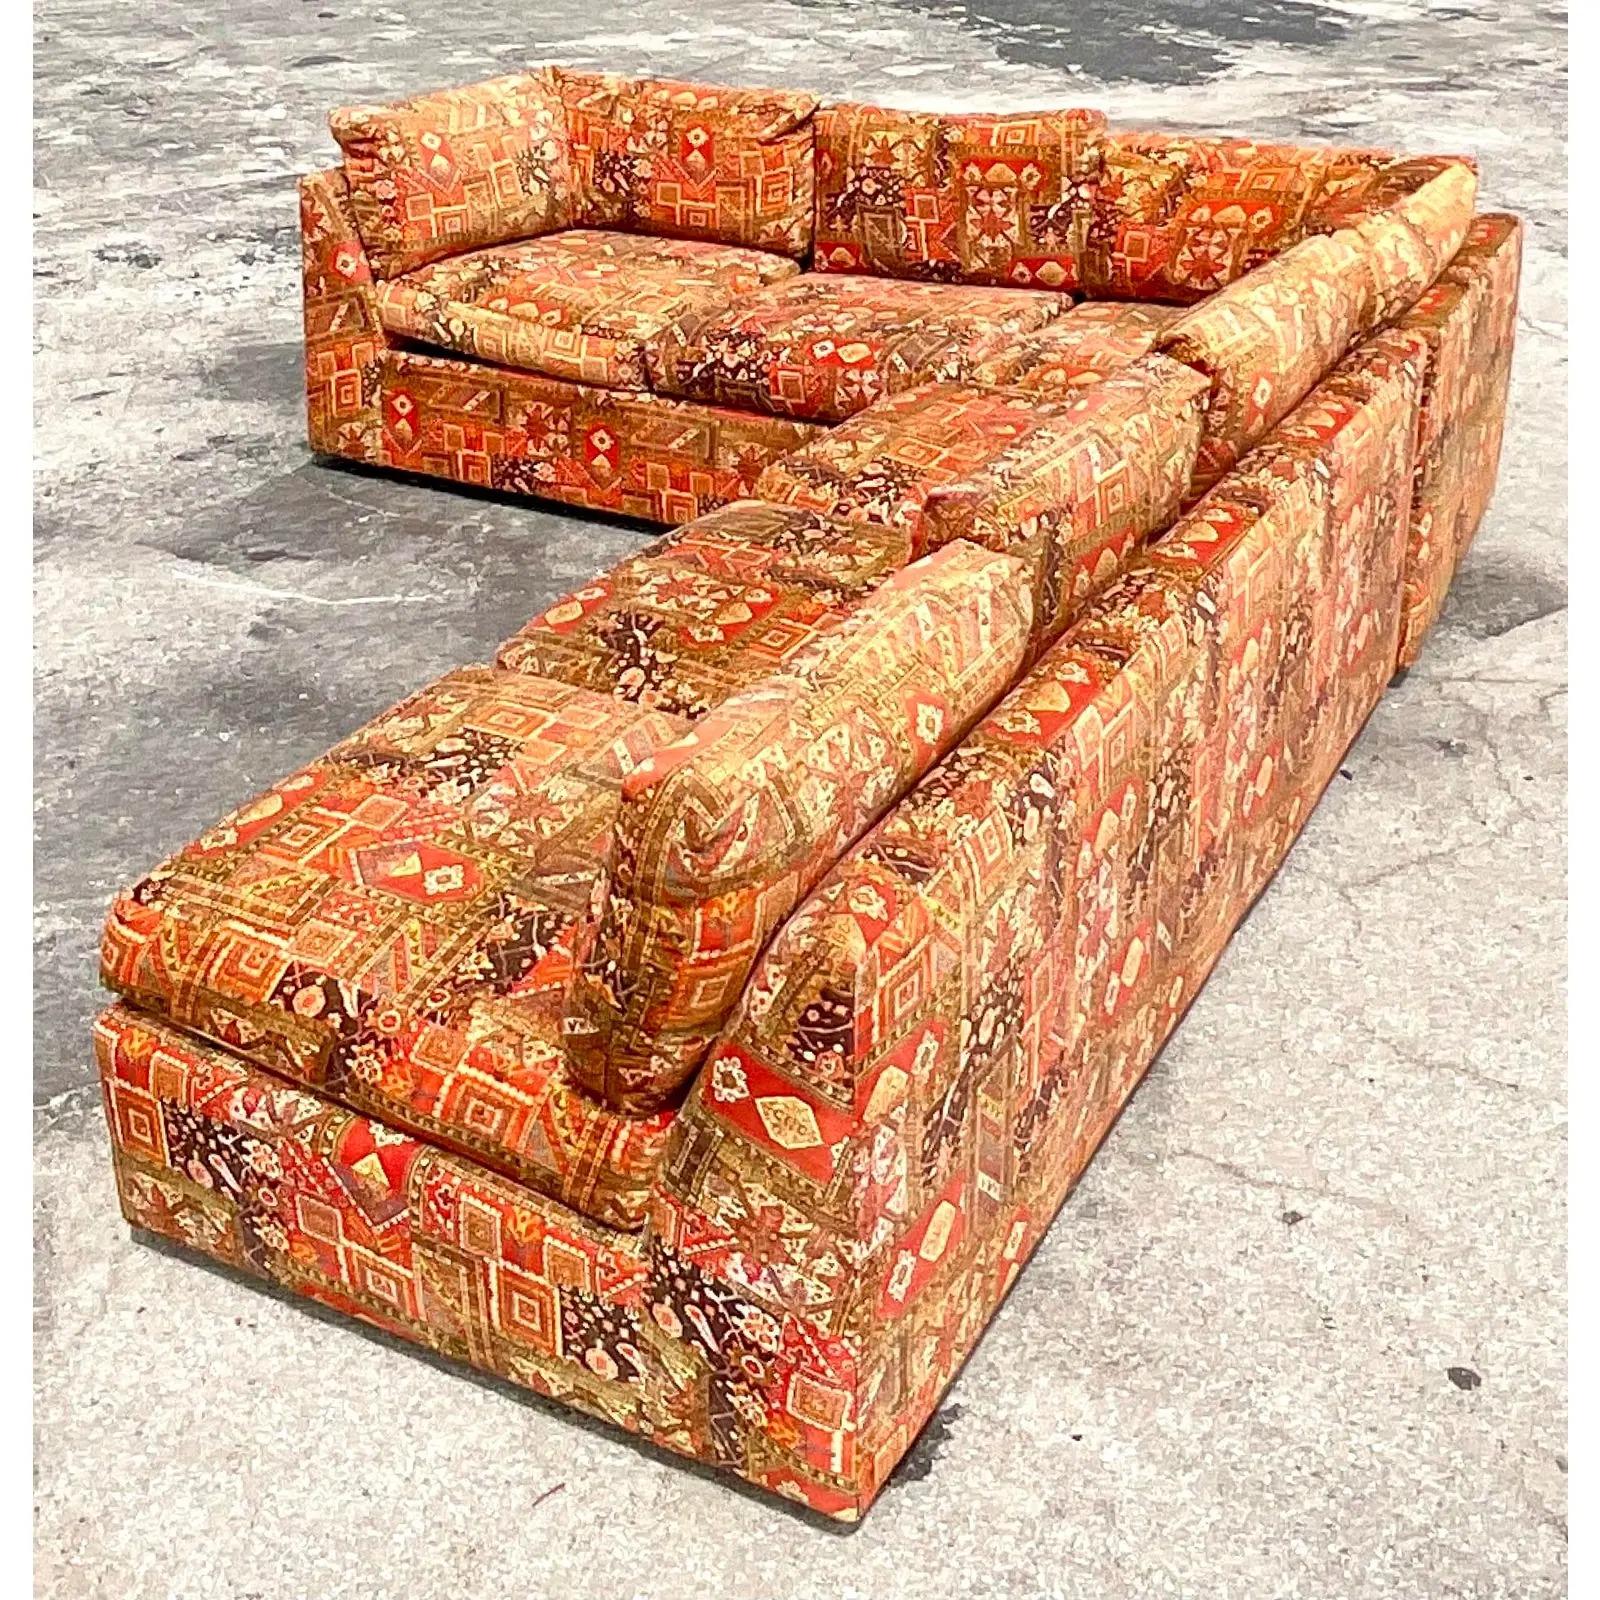 Incredible vintage 70s printed sectional sofa. Designed by the iconic Milo Baughman for the equally iconic Maker Thayer Coggin. Fantastic vintage print in deep sexy colors. A real showstopper. Makers mark under the cushions. Acquired from a Palm